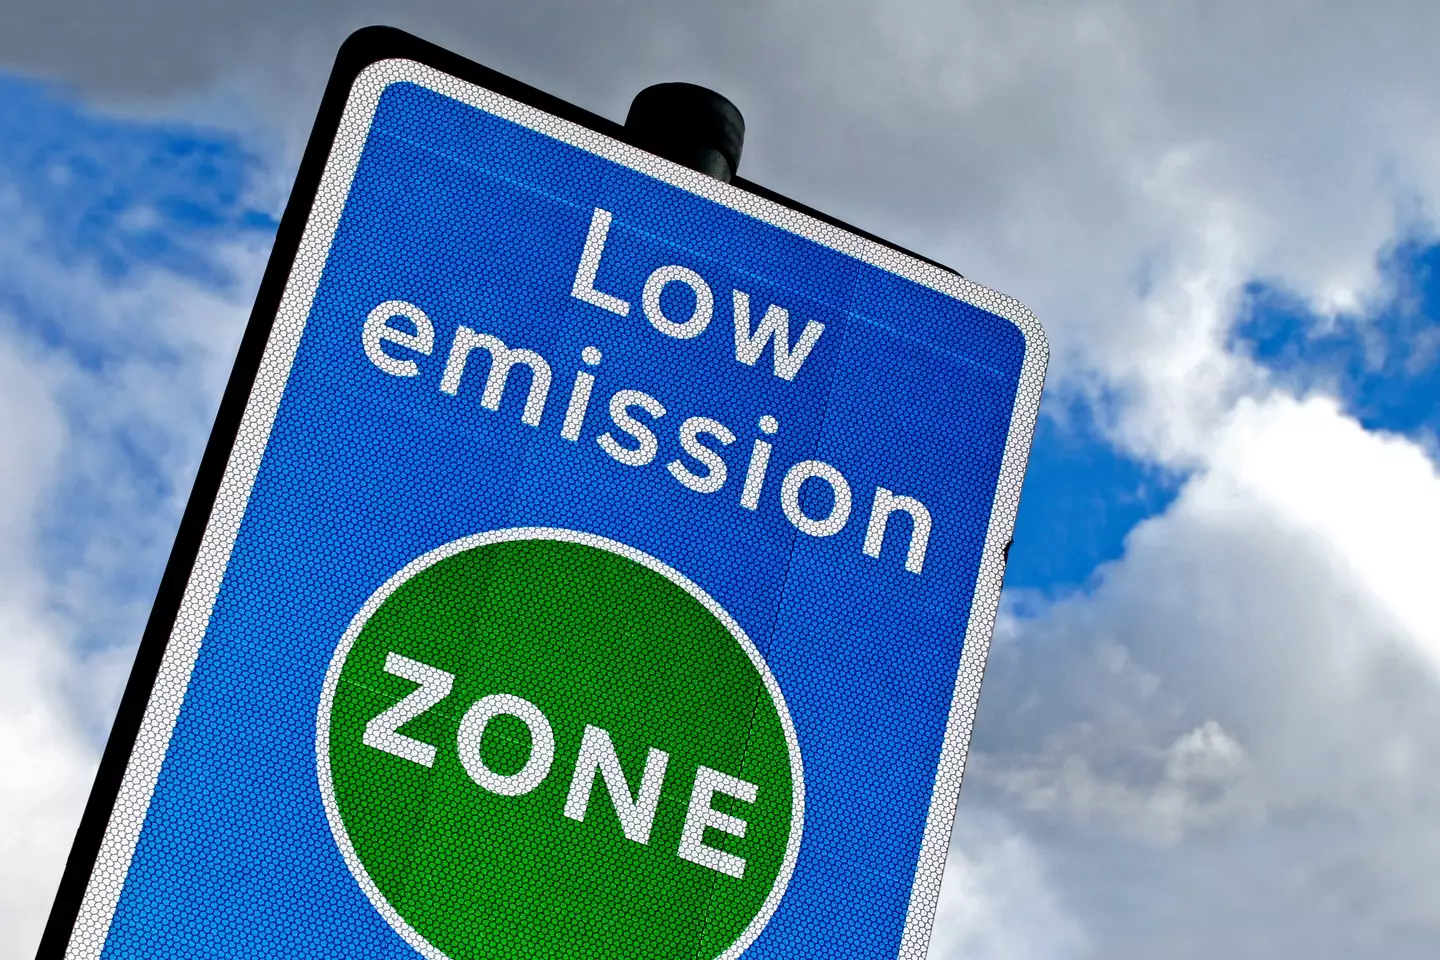 The use of fake number plates is expected to rise following the expansion of Ulez (Ultra Low Emission Zone) in London.